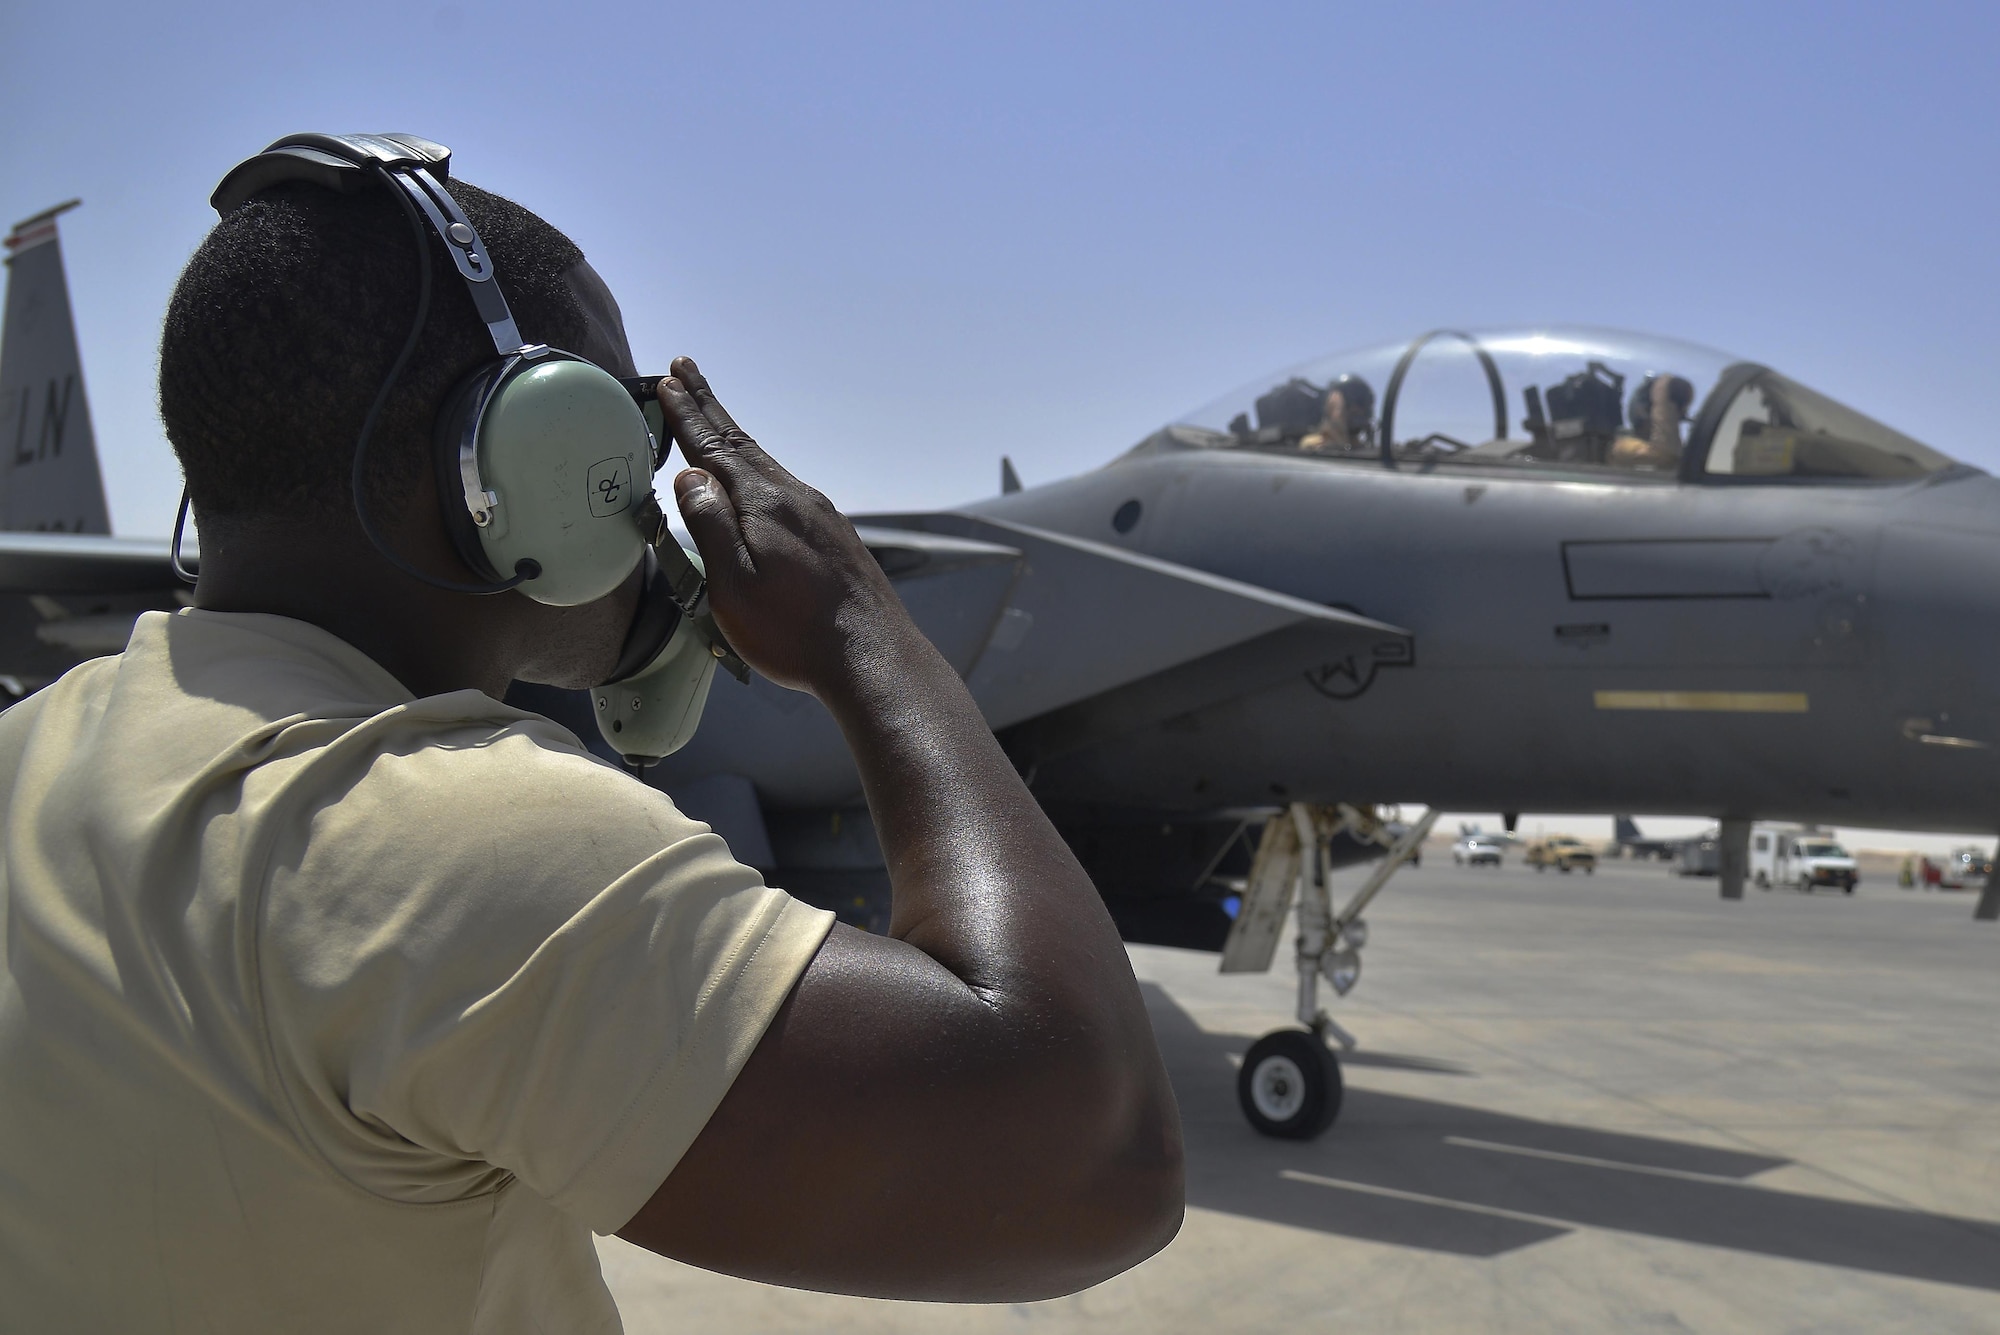 Staff Sgt. Oren renders a salute to F-15E Strike Eagle aircrew members as they taxi to the runway at an undisclosed location in Southwest Asia May 31, 2015. Sgt. Oren is a dedicated crew chief assigned to the 380th Expeditionary Aircraft Maintenance Squadron. (U.S. Air Force photo/Tech. Sgt. Christopher Boitz) 